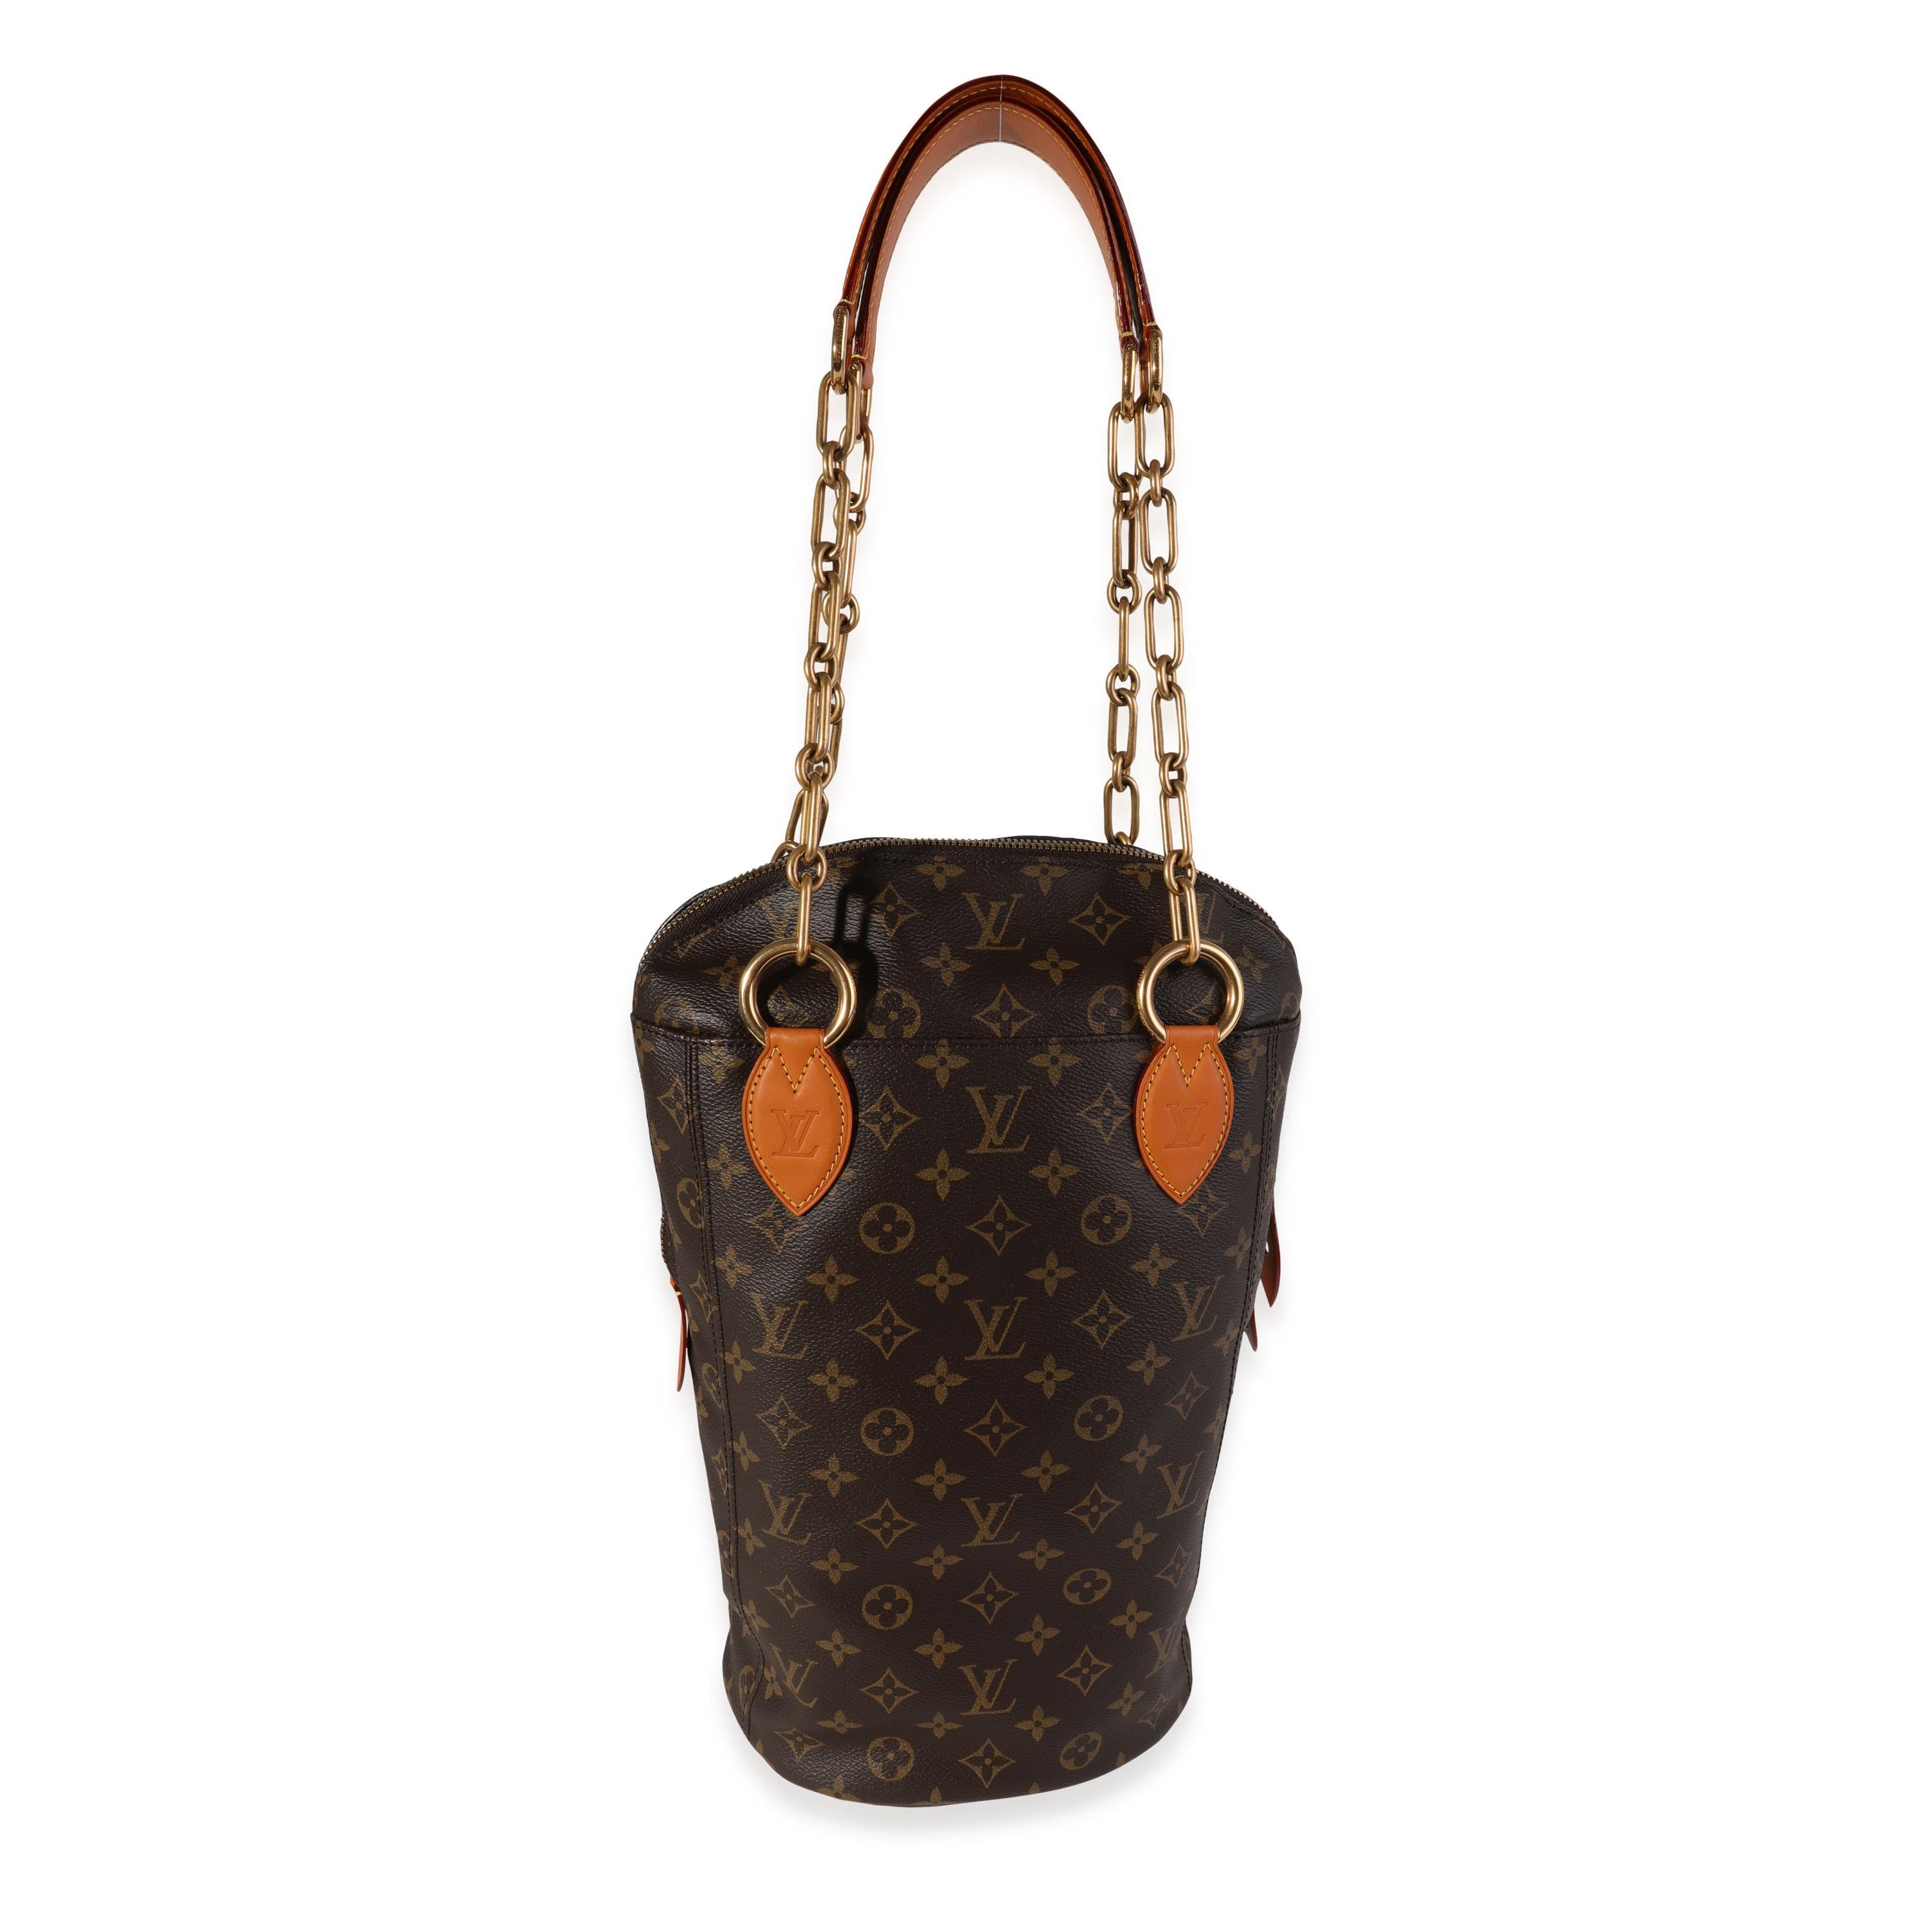 Listing Title: Louis Vuitton Celebrating Monogram Iconoclasts Karl Lagerfeld Punching Bag GM
SKU: 119810
MSRP: 3400.00
Condition: Pre-owned (3000)
Handbag Condition: Very Good
Condition Comments: Very Good Condition. Light marks to leather.